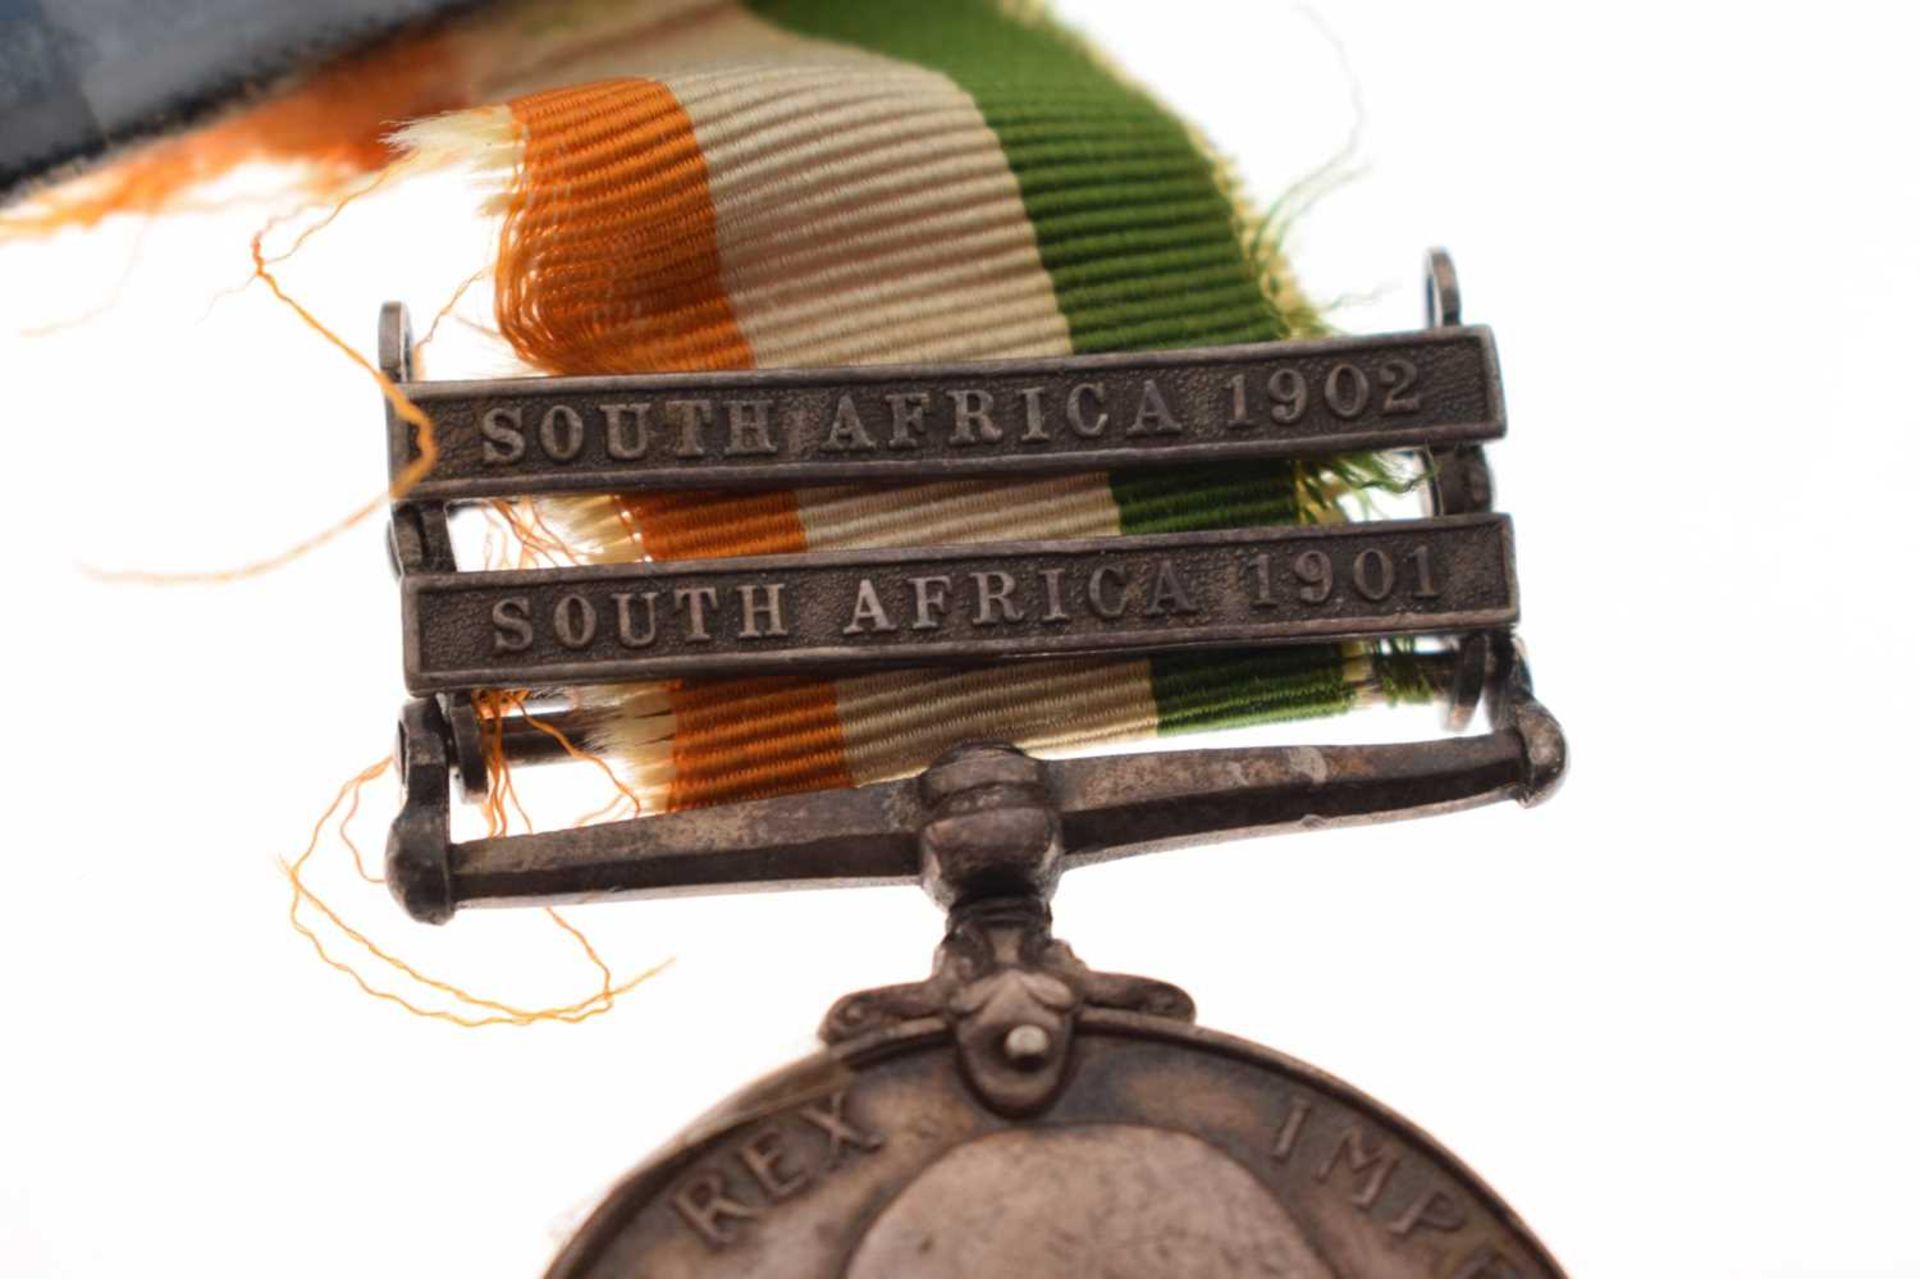 King’s South Africa Medal 1901-1902 - Image 2 of 8